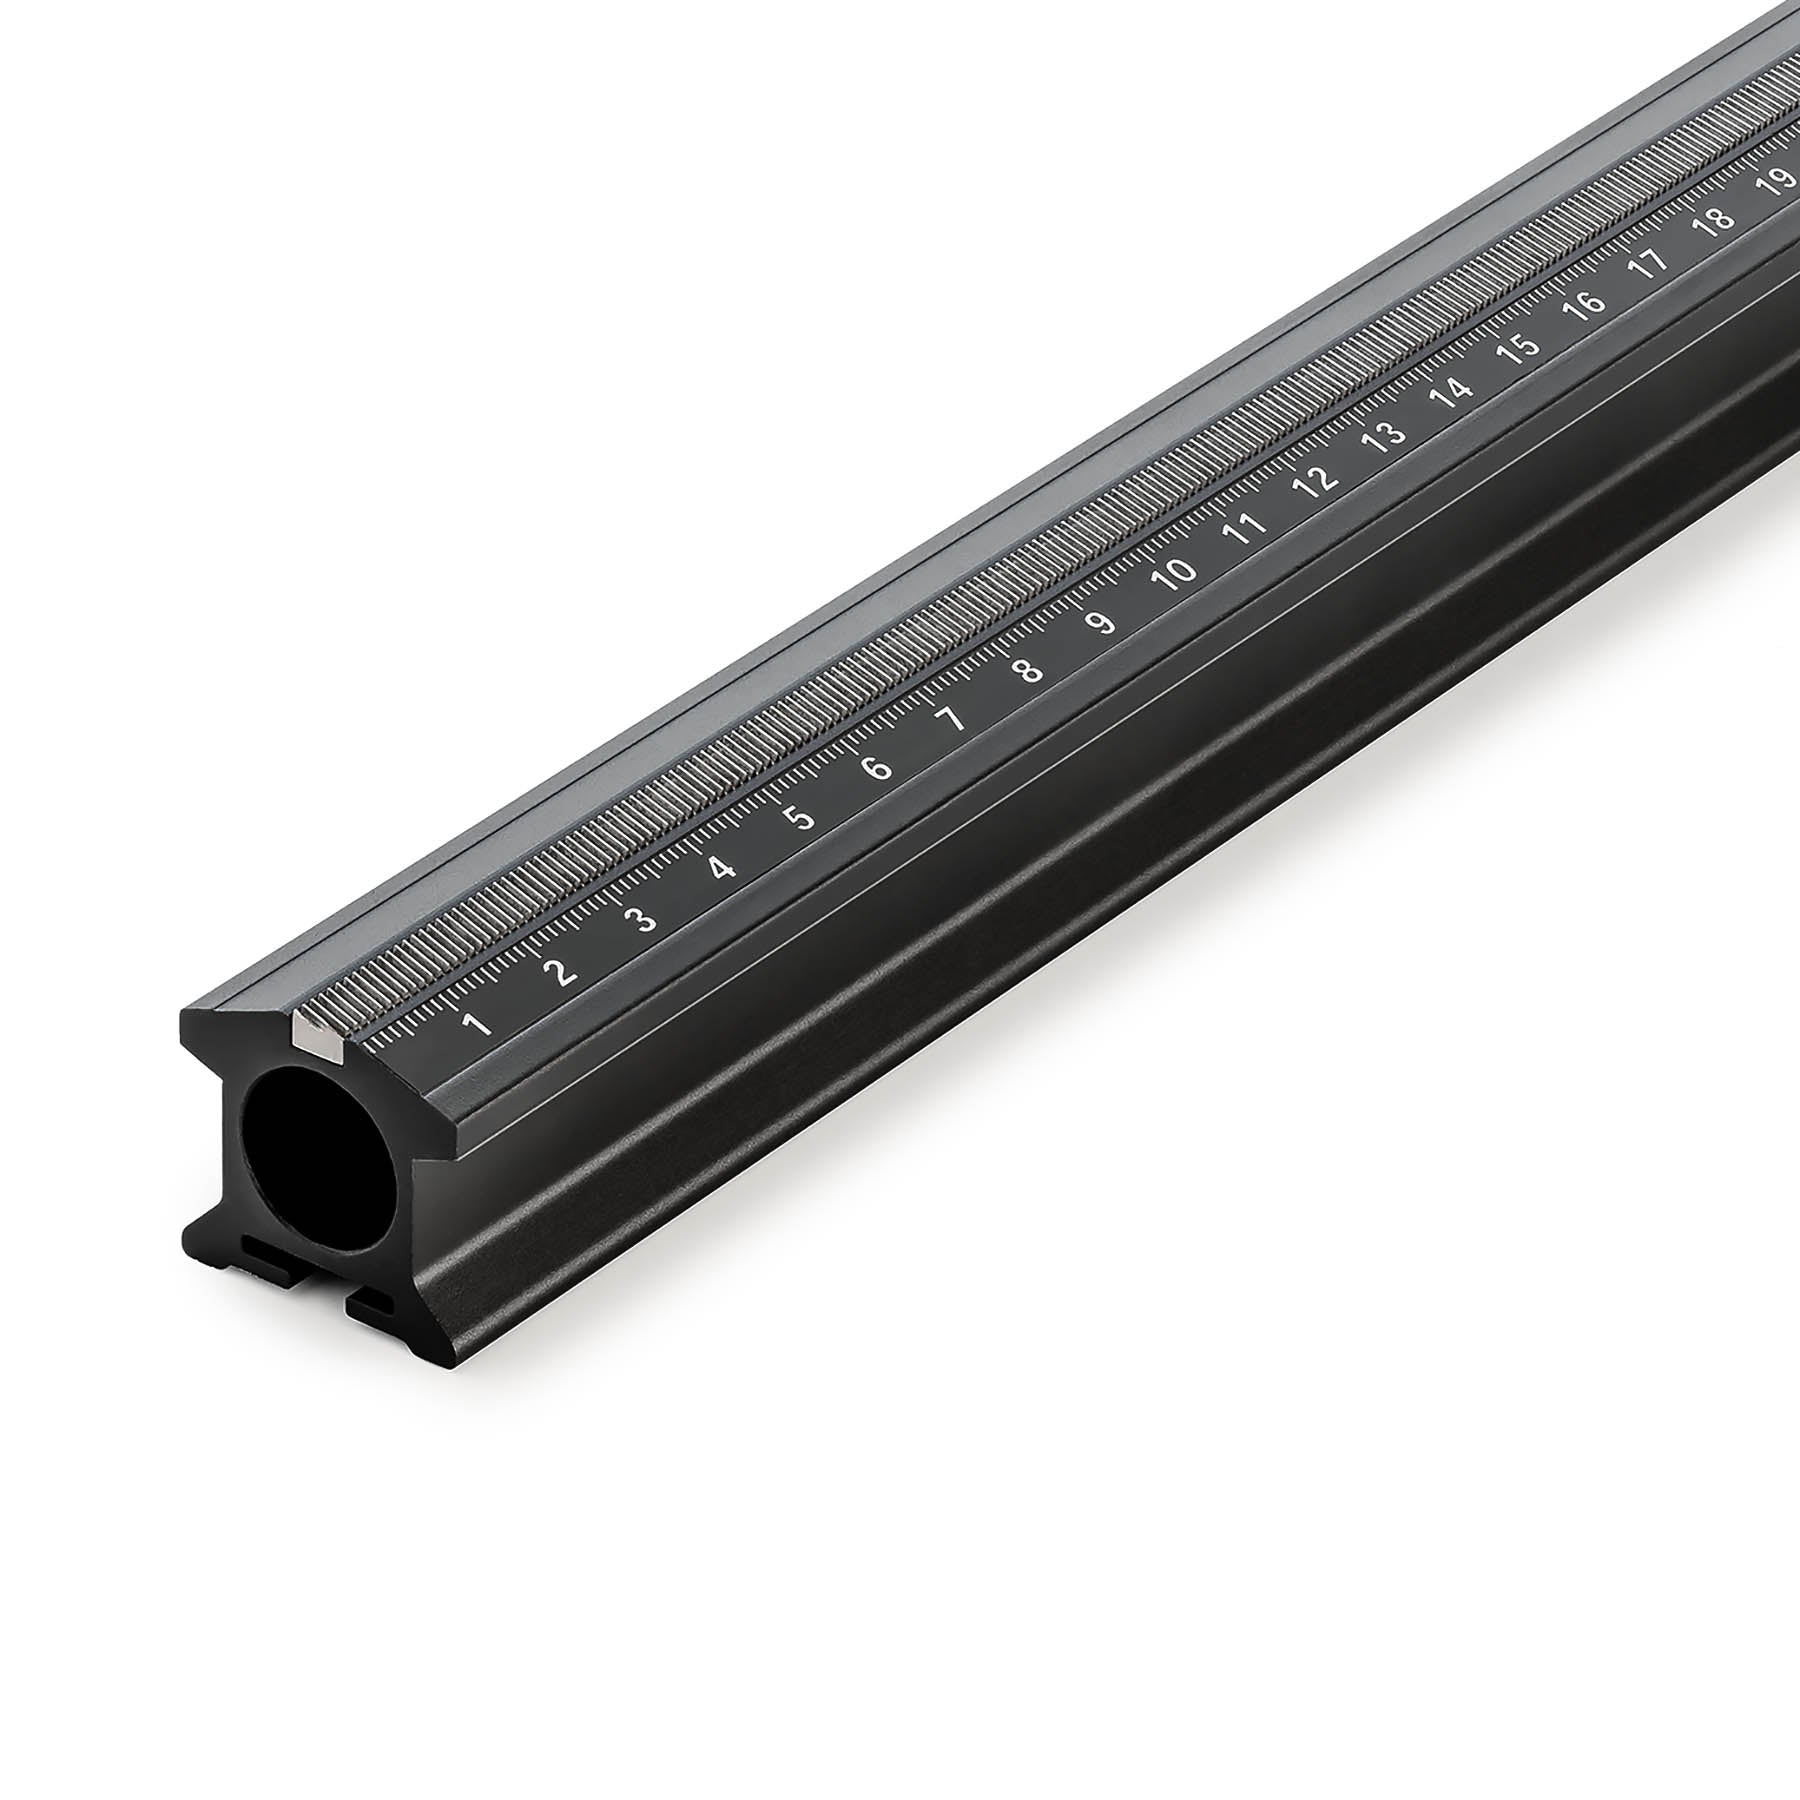 ARCA-SWISS monorail II units available in lengths 15cm, 20cm, 25cm, 30cm and 40cm